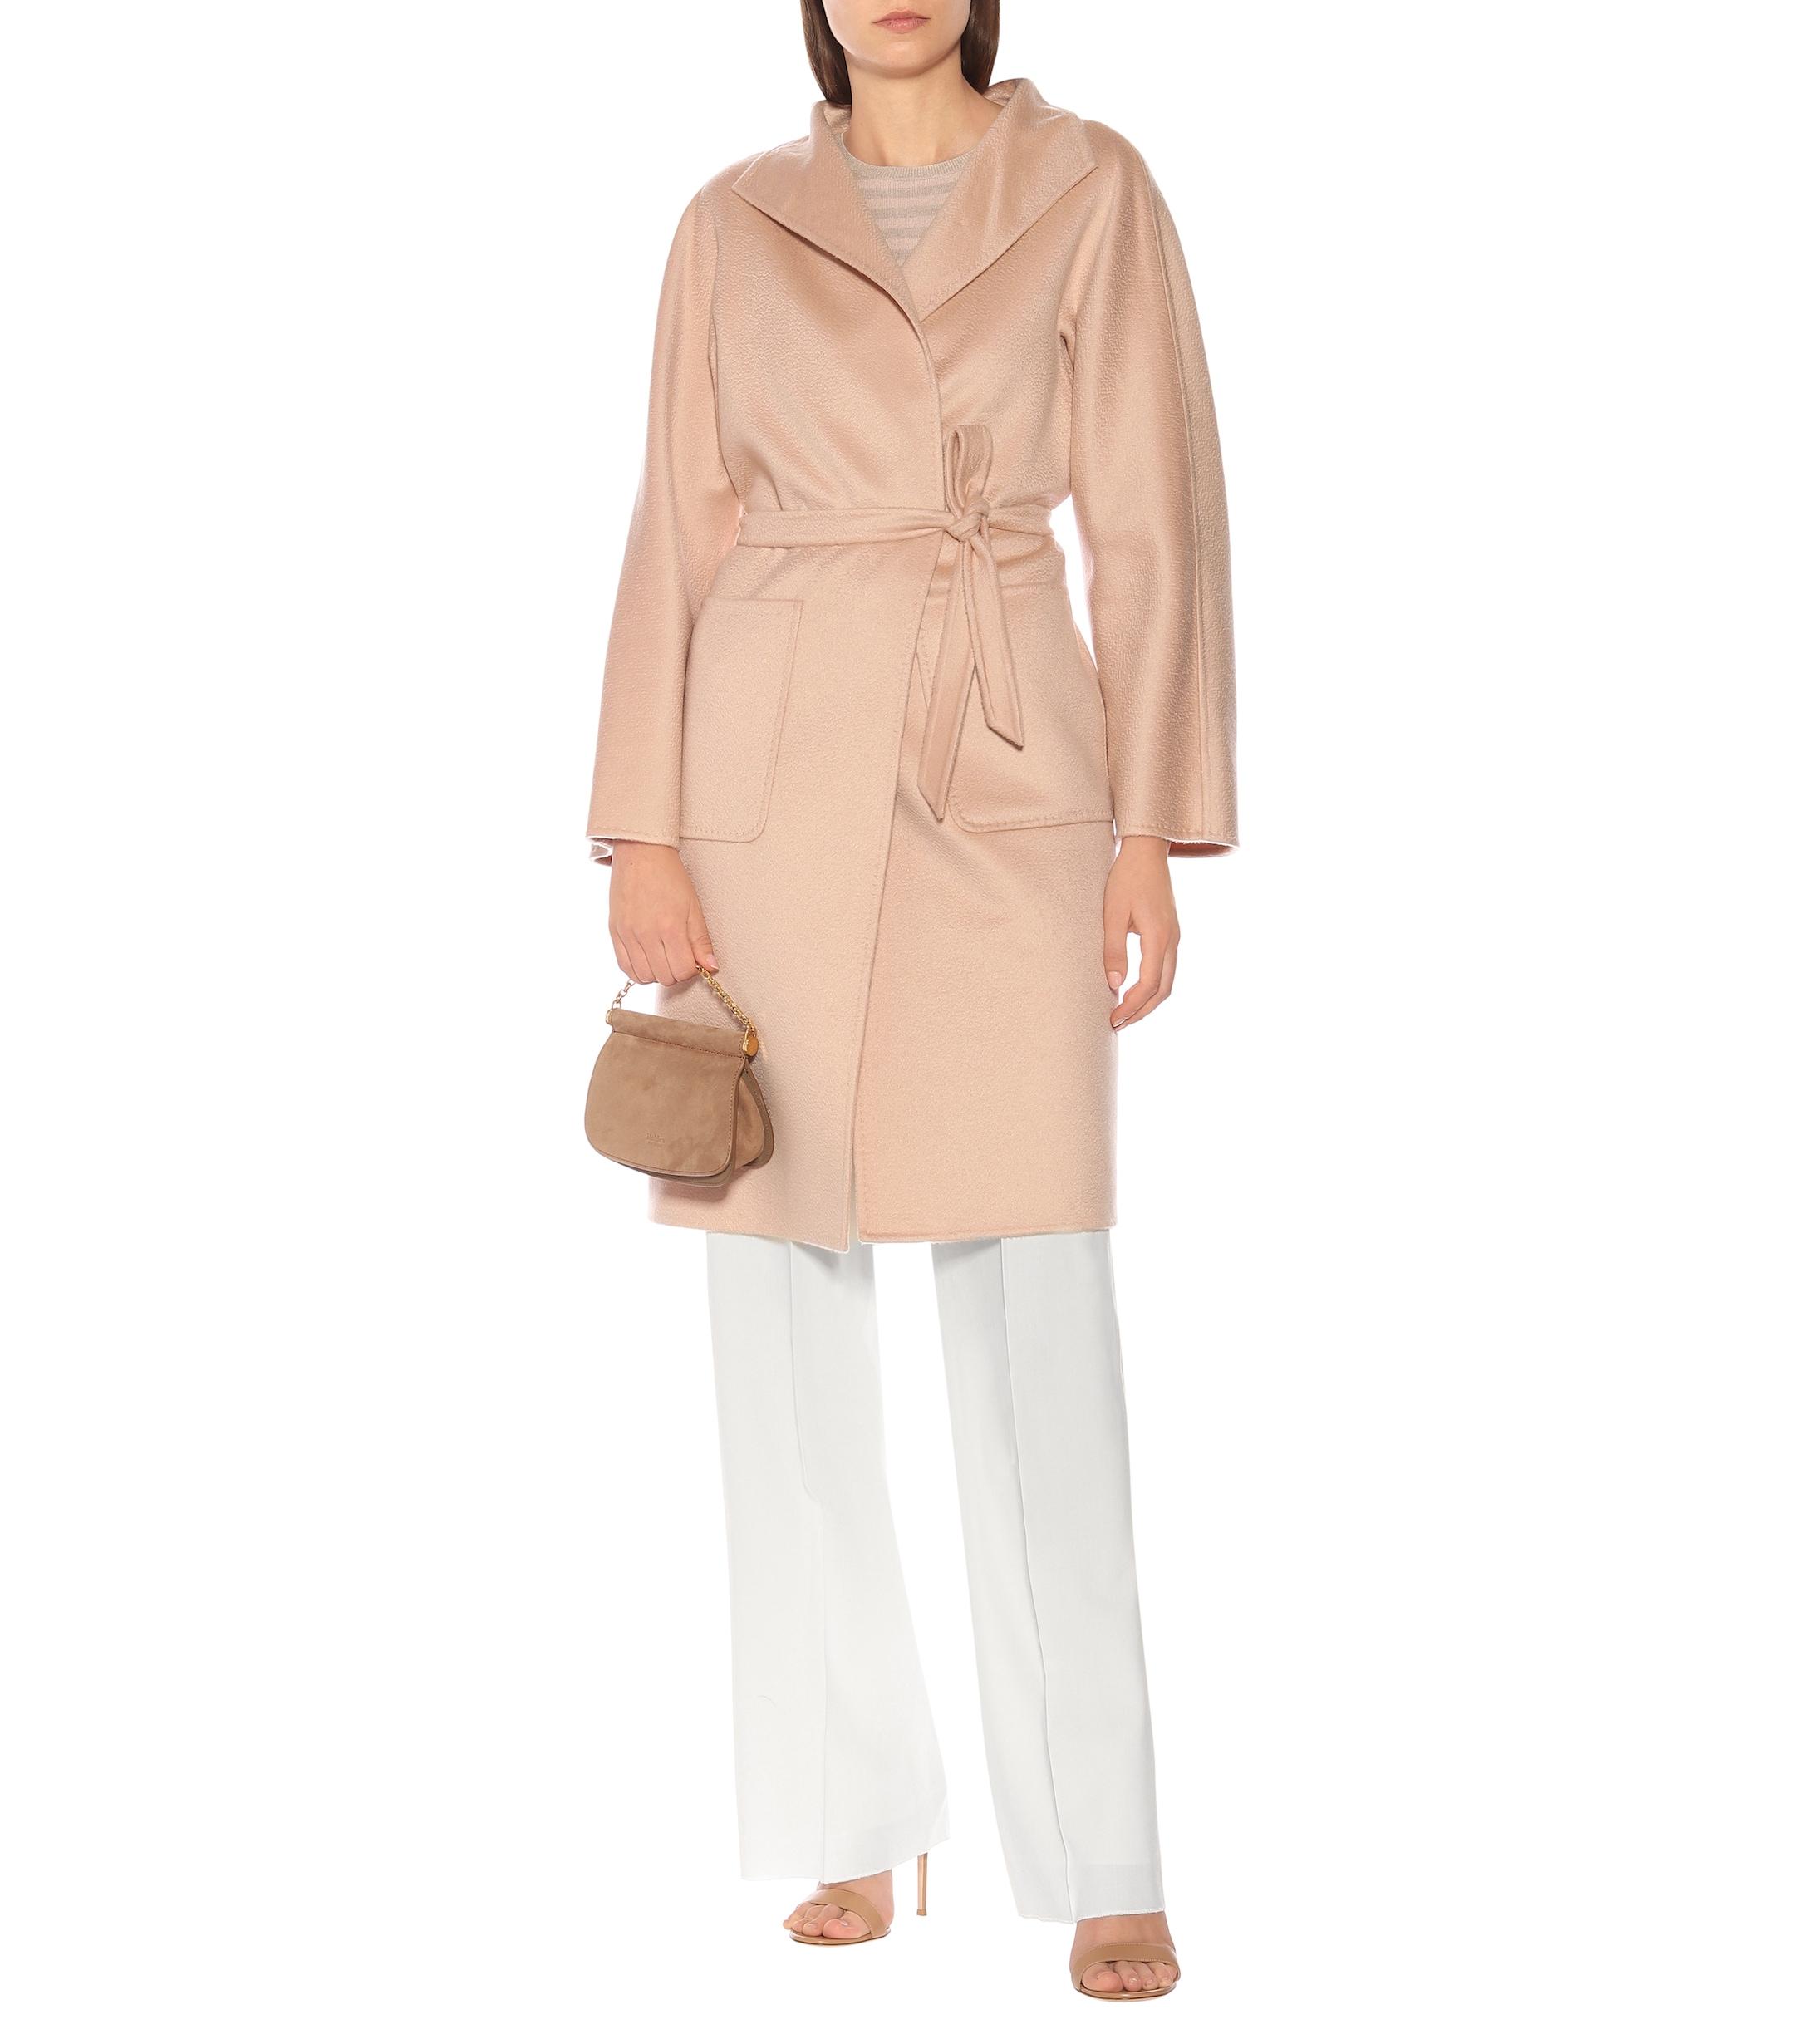 Max Mara Lilia Double-face Cashmere Coat in Pink - Lyst